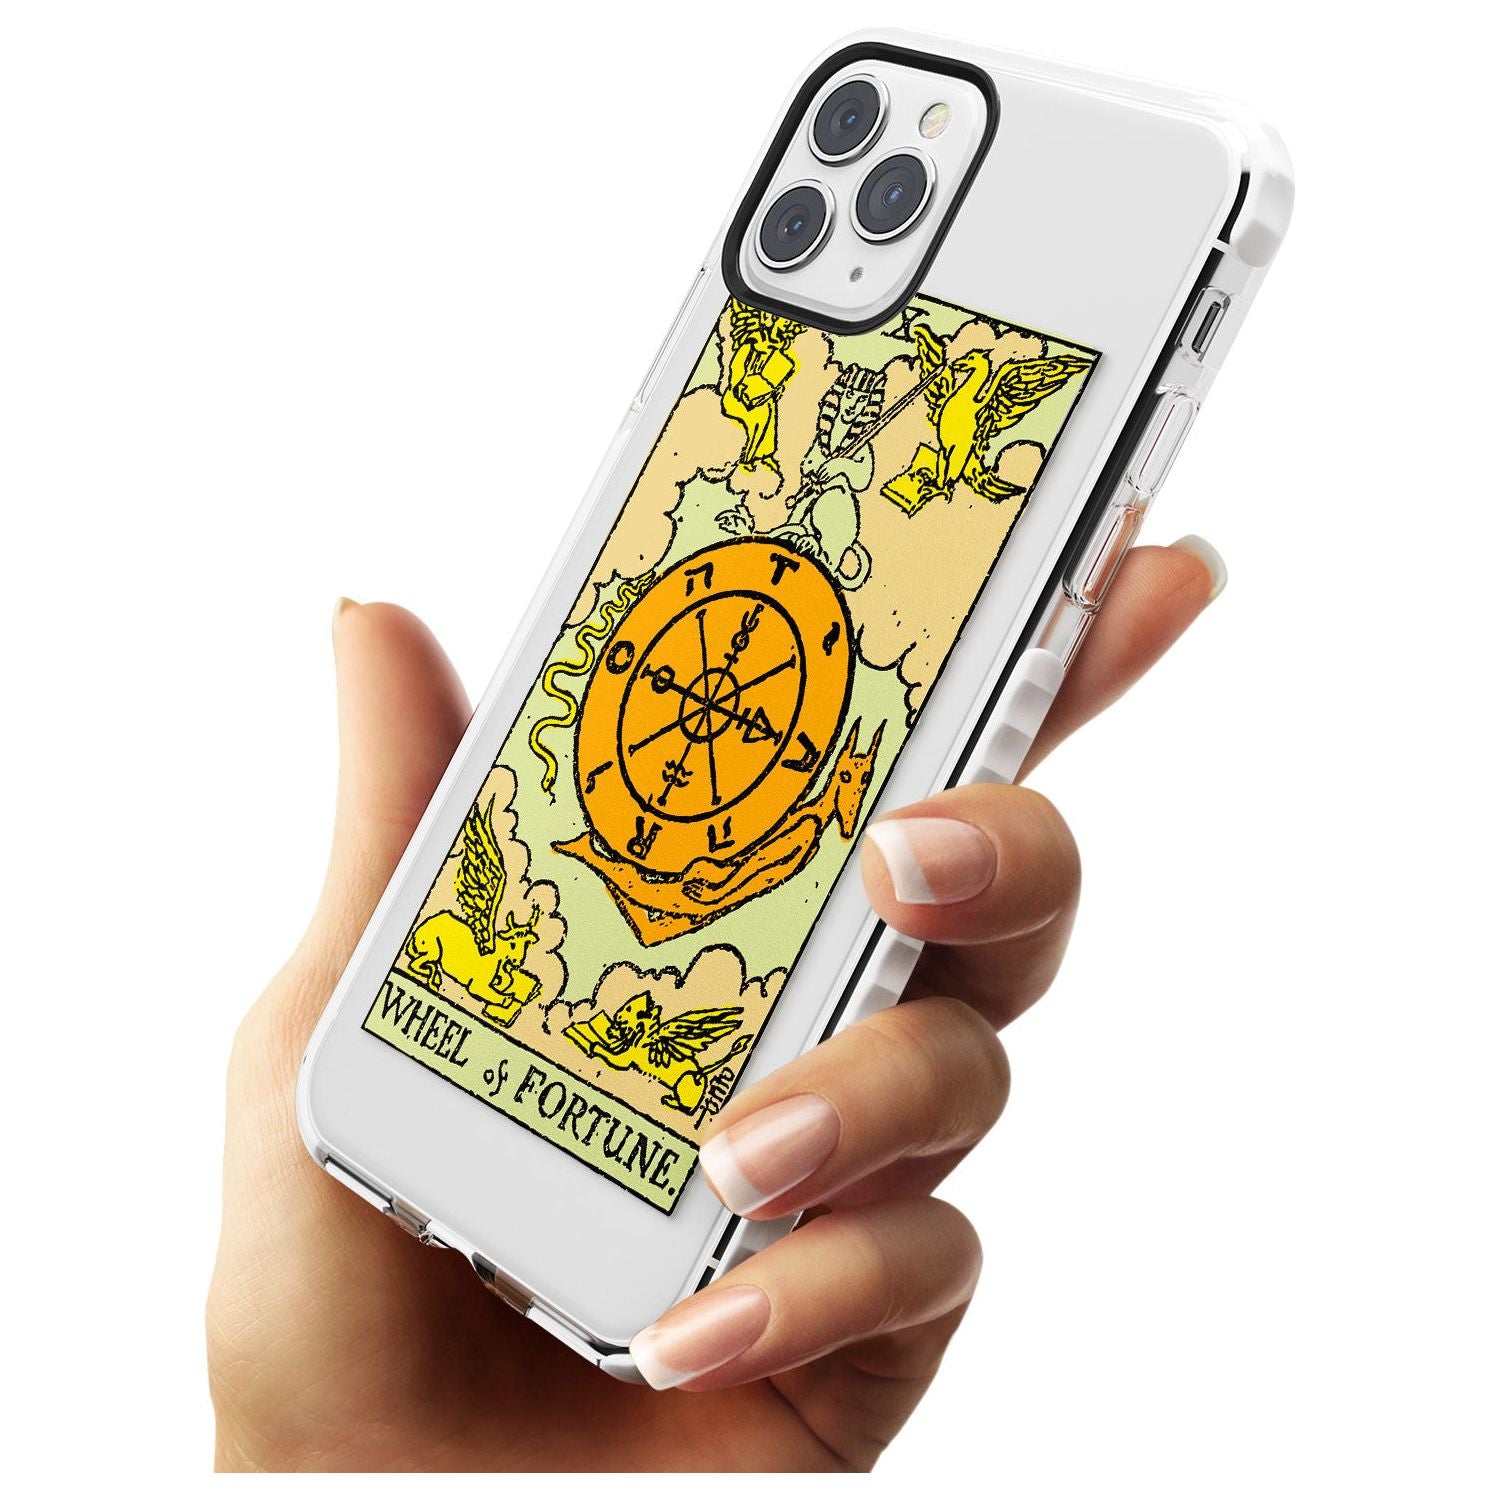 Wheel of Fortune Tarot Card - Colour Slim TPU Phone Case for iPhone 11 Pro Max